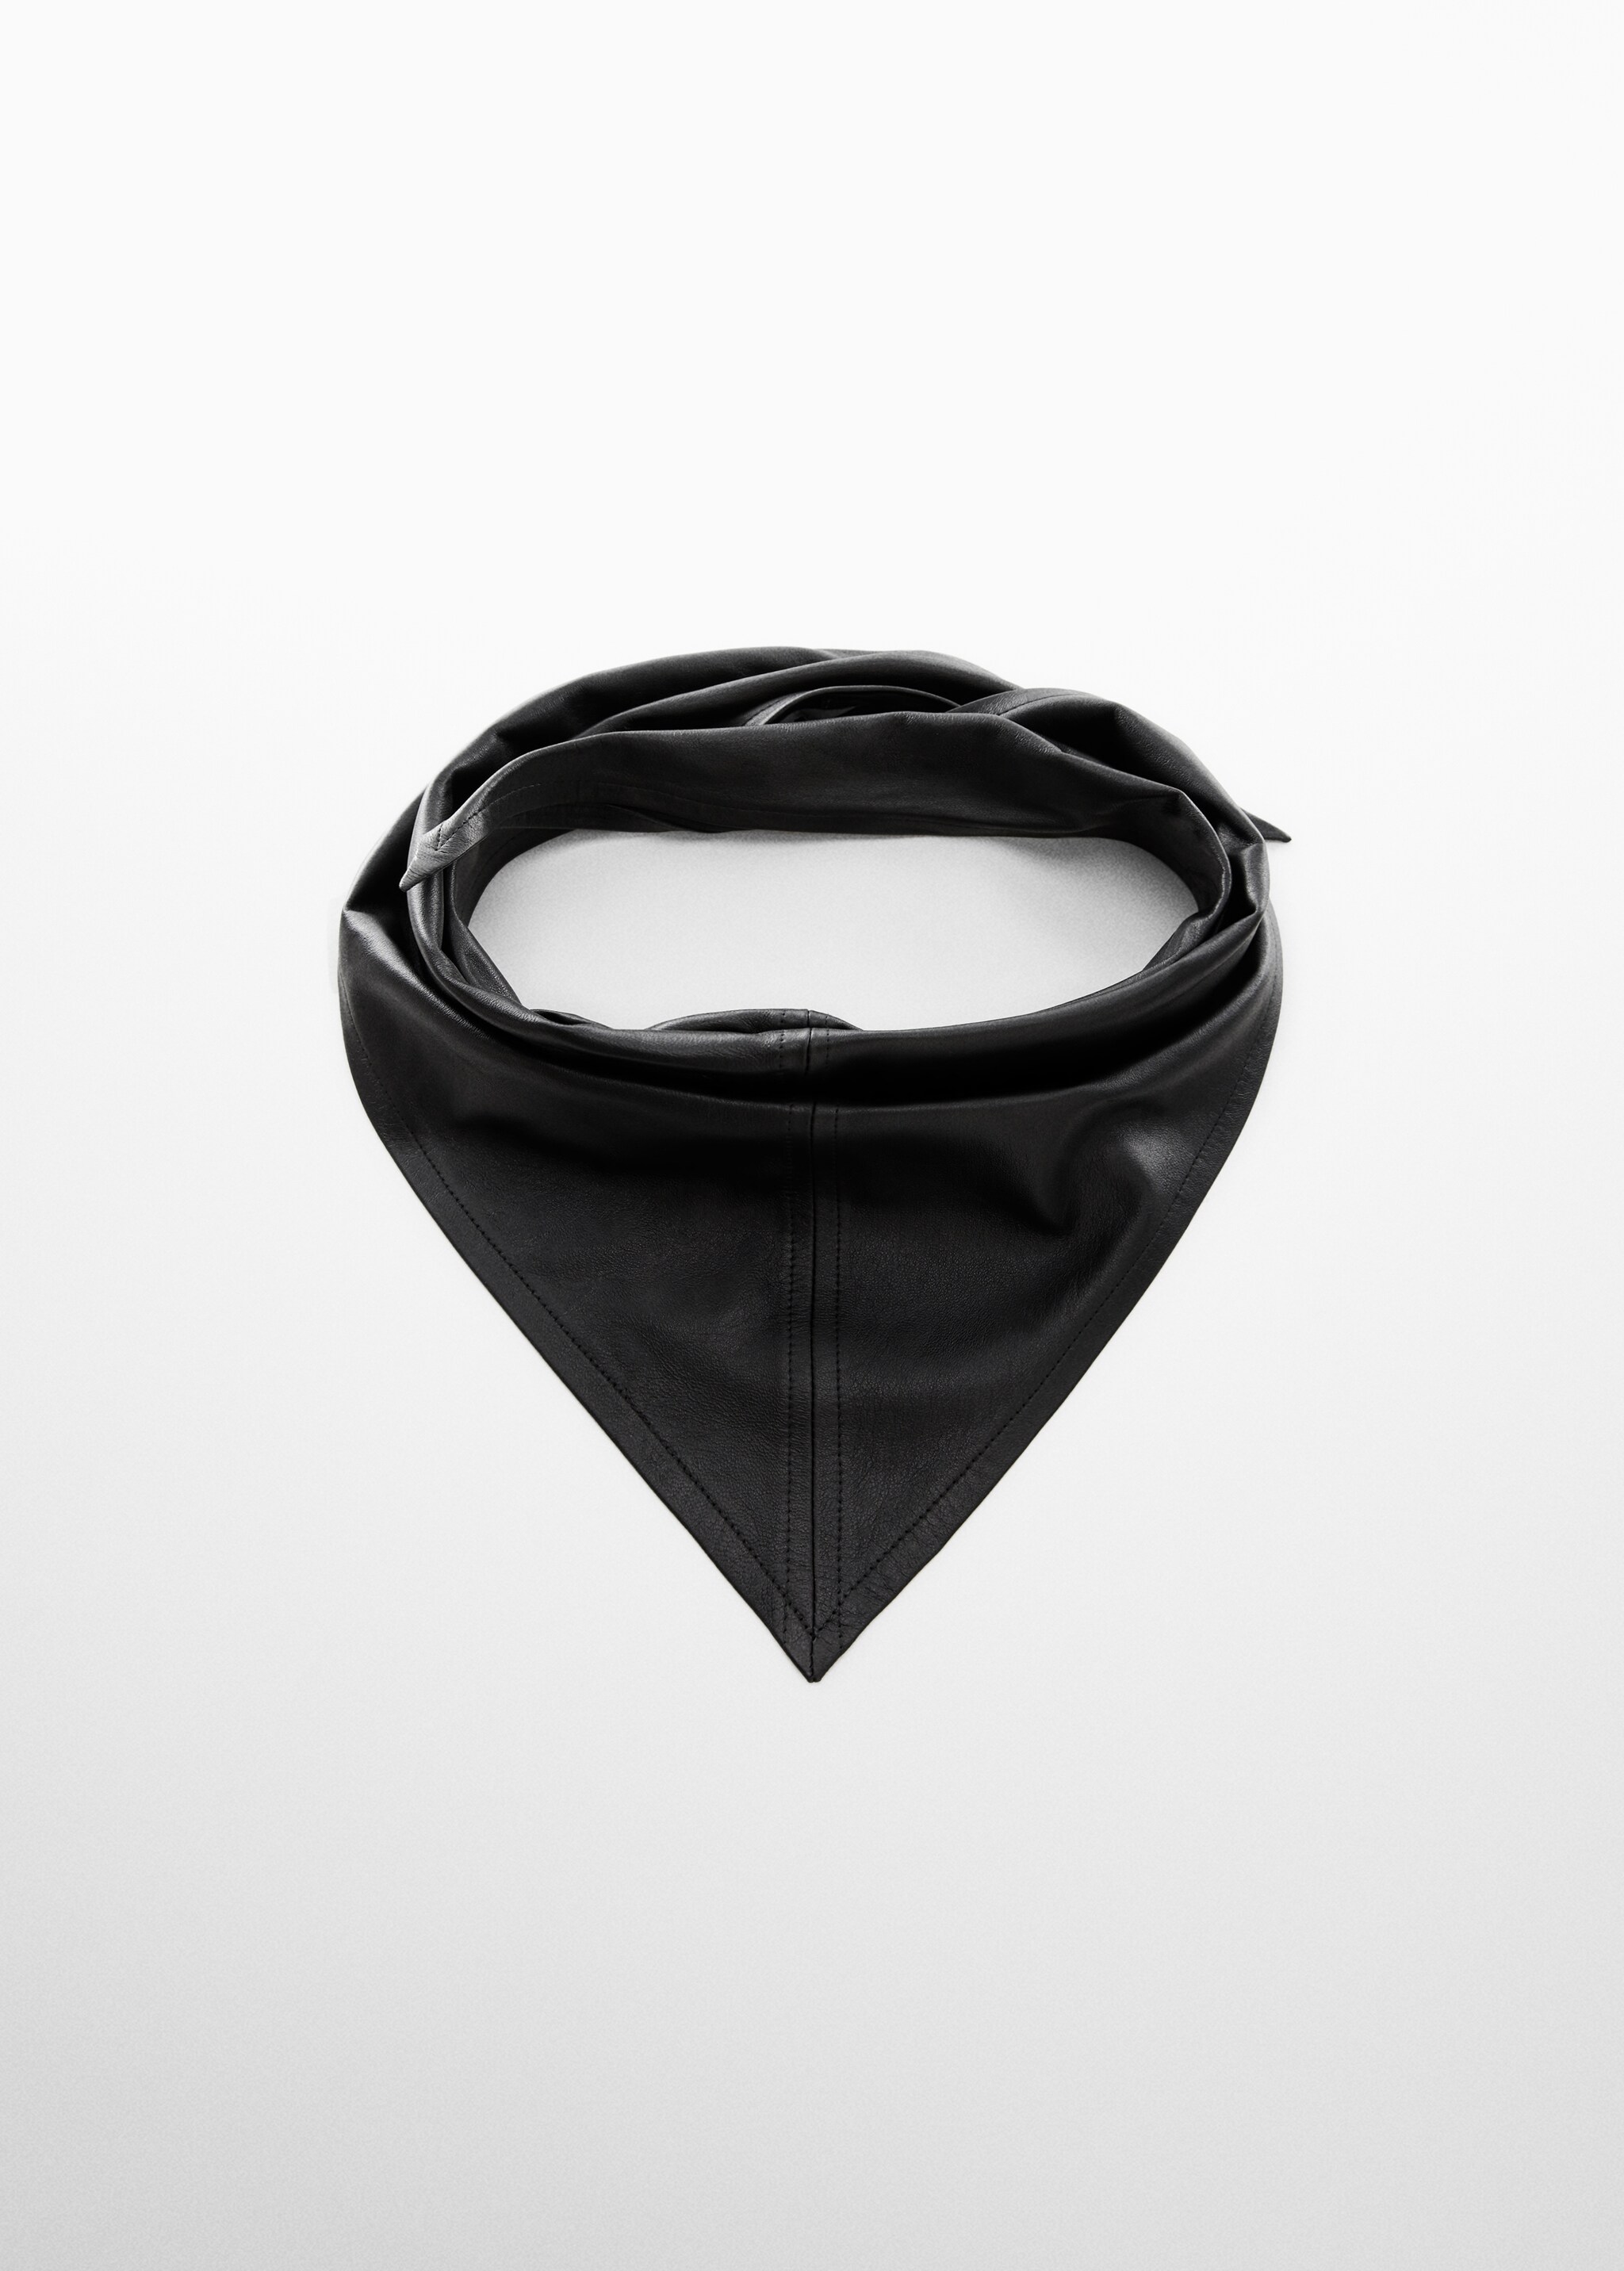 100% leather handkerchief - Article without model